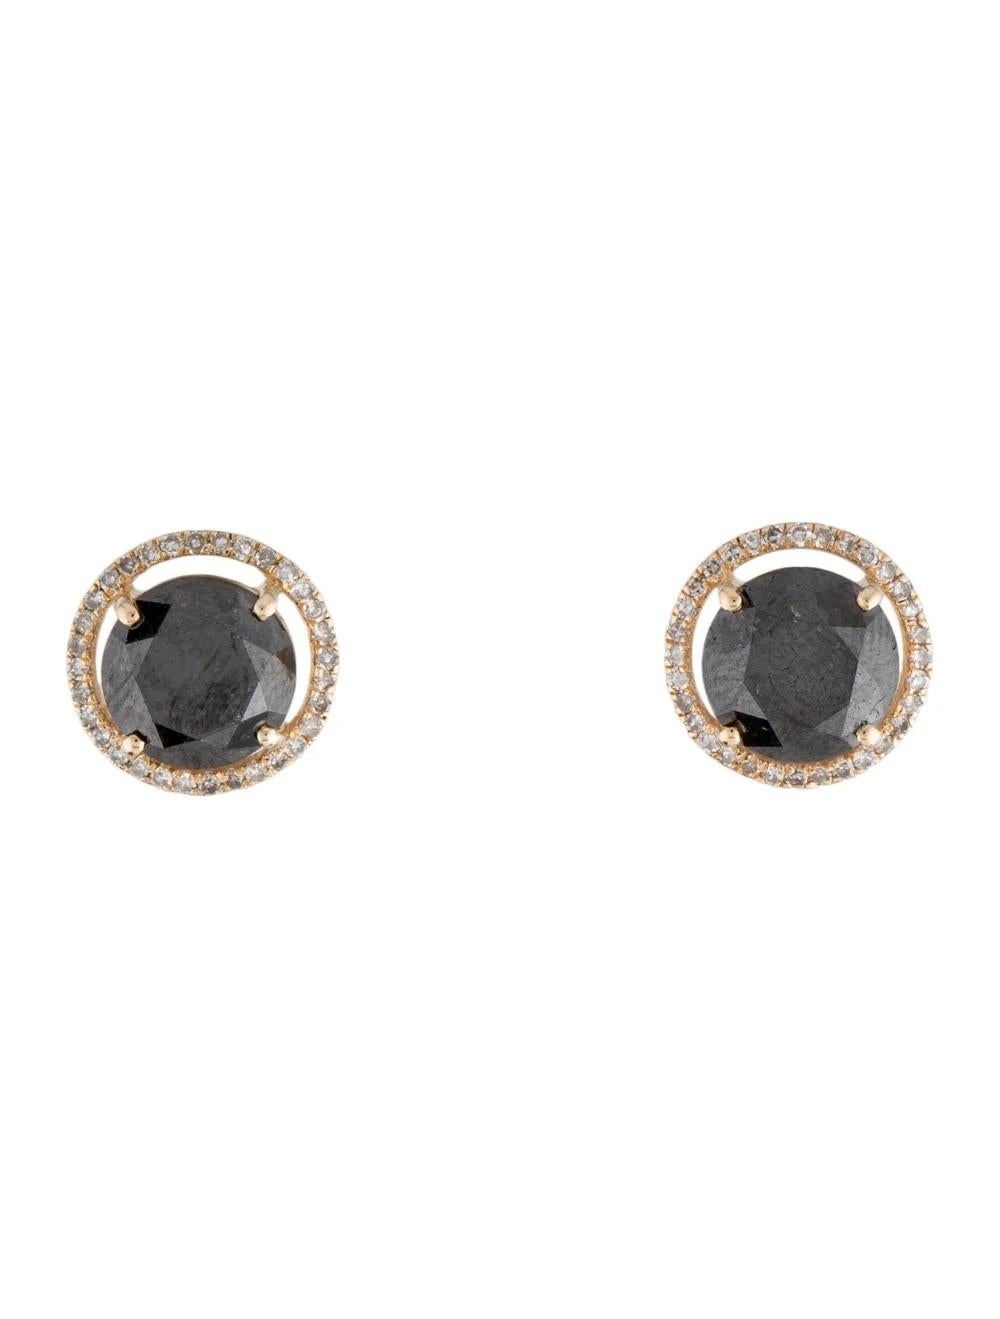 Elevate your style with these stunning 14K Yellow Gold Diamond Stud Earrings. Crafted to perfection, these earrings feature a captivating combination of round brilliant diamonds, exuding timeless elegance and sophistication.

Specifications:

*